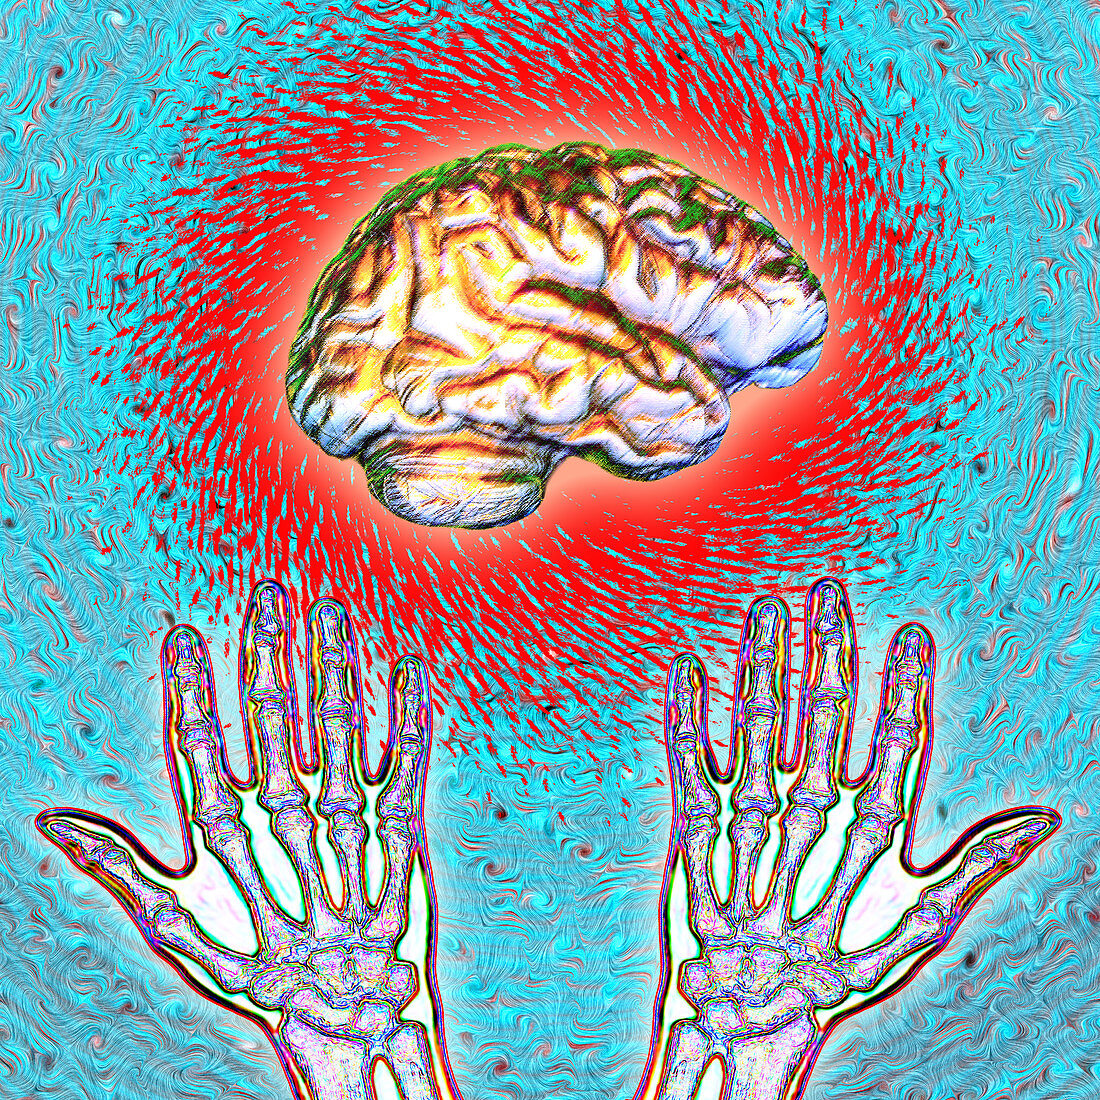 Brain and Hands Energy